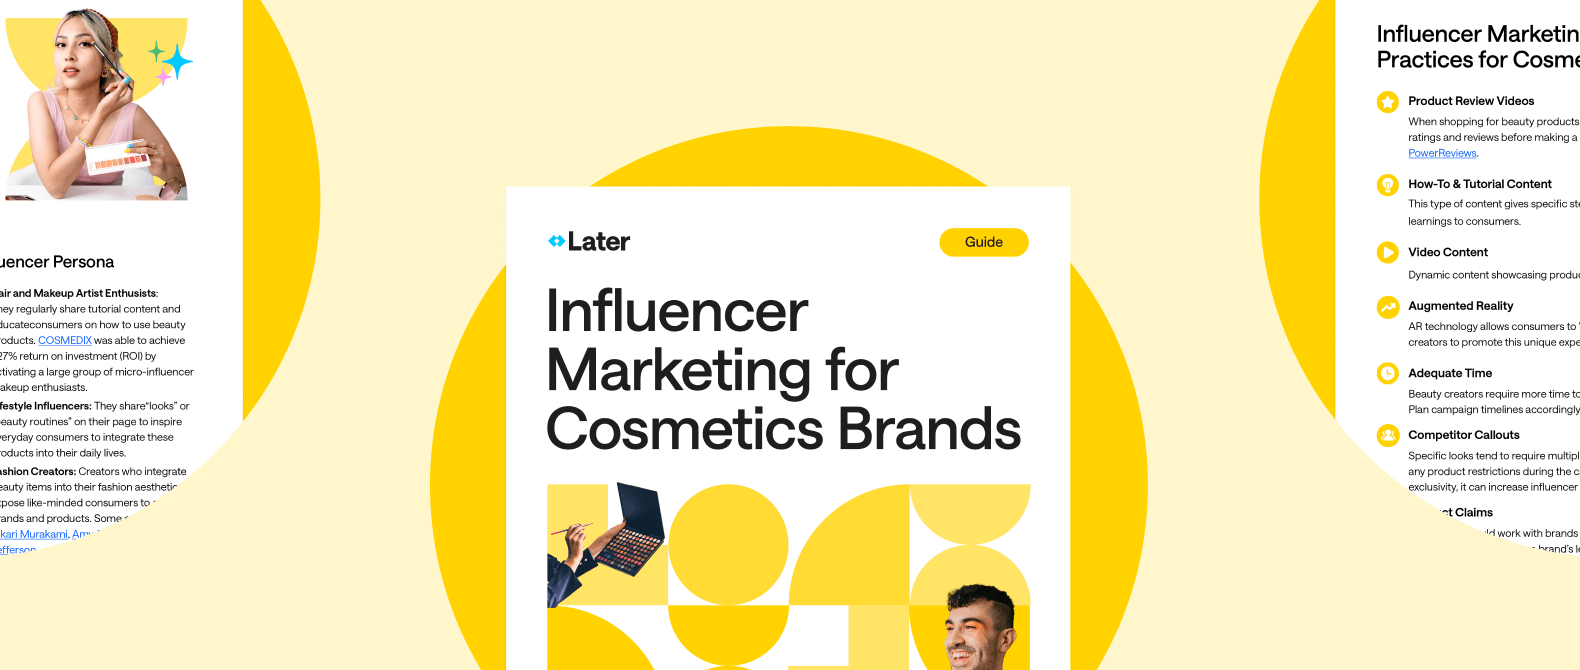 Influencer Marketing Guide for Cosmetic Brands thumbnail